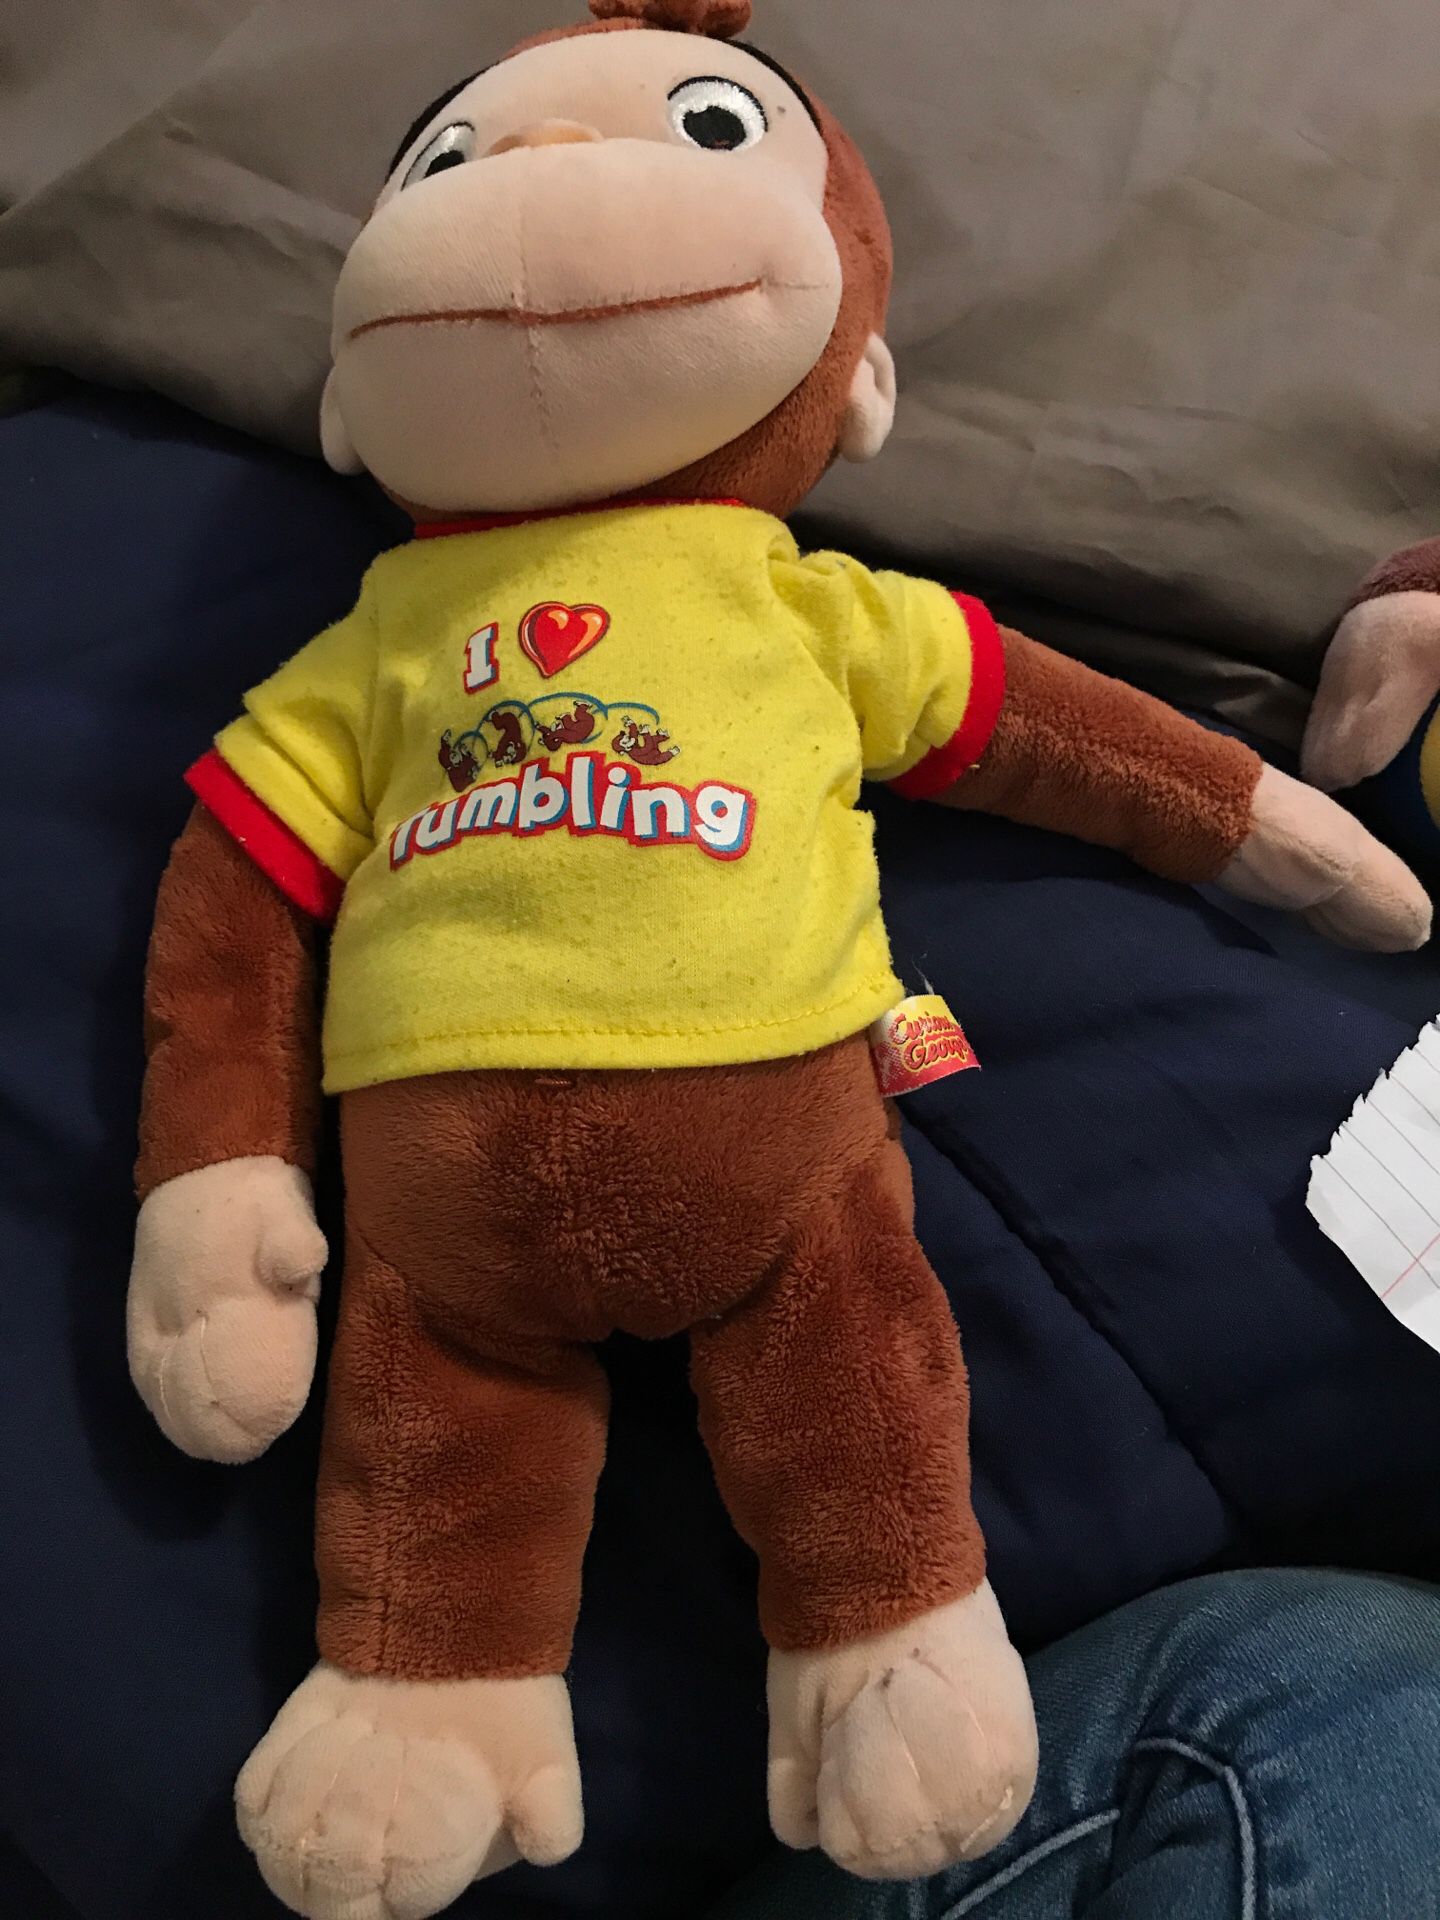 14” Curious George that tumbles stuffed animal